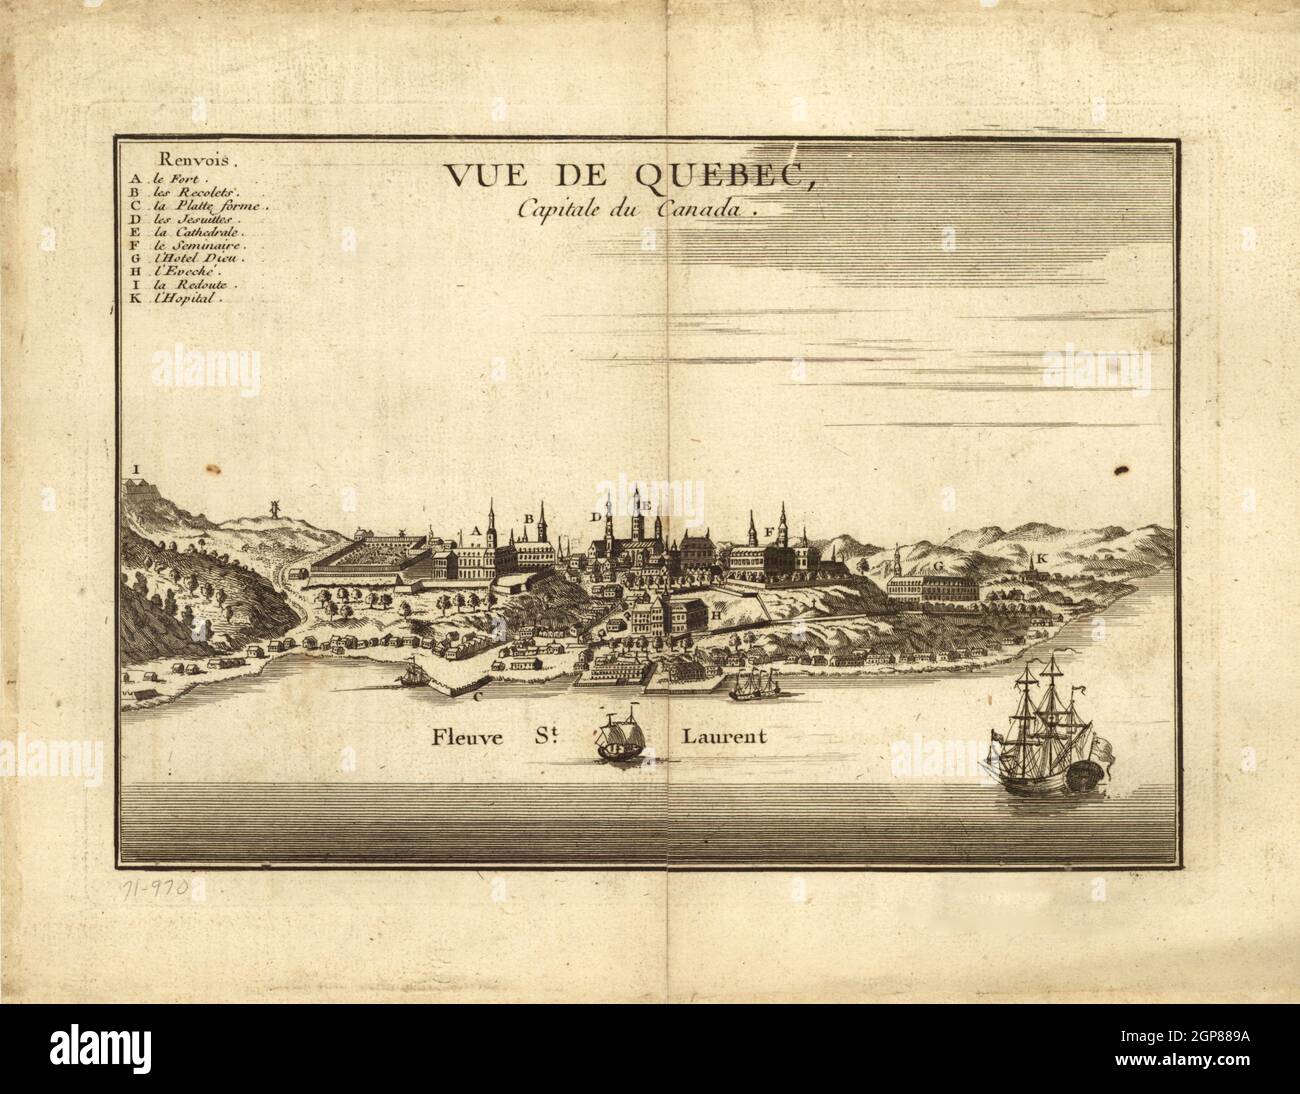 Panoramic view of Quebec City, Canada, in1755. Map also shows prominent buildings. Stock Photo